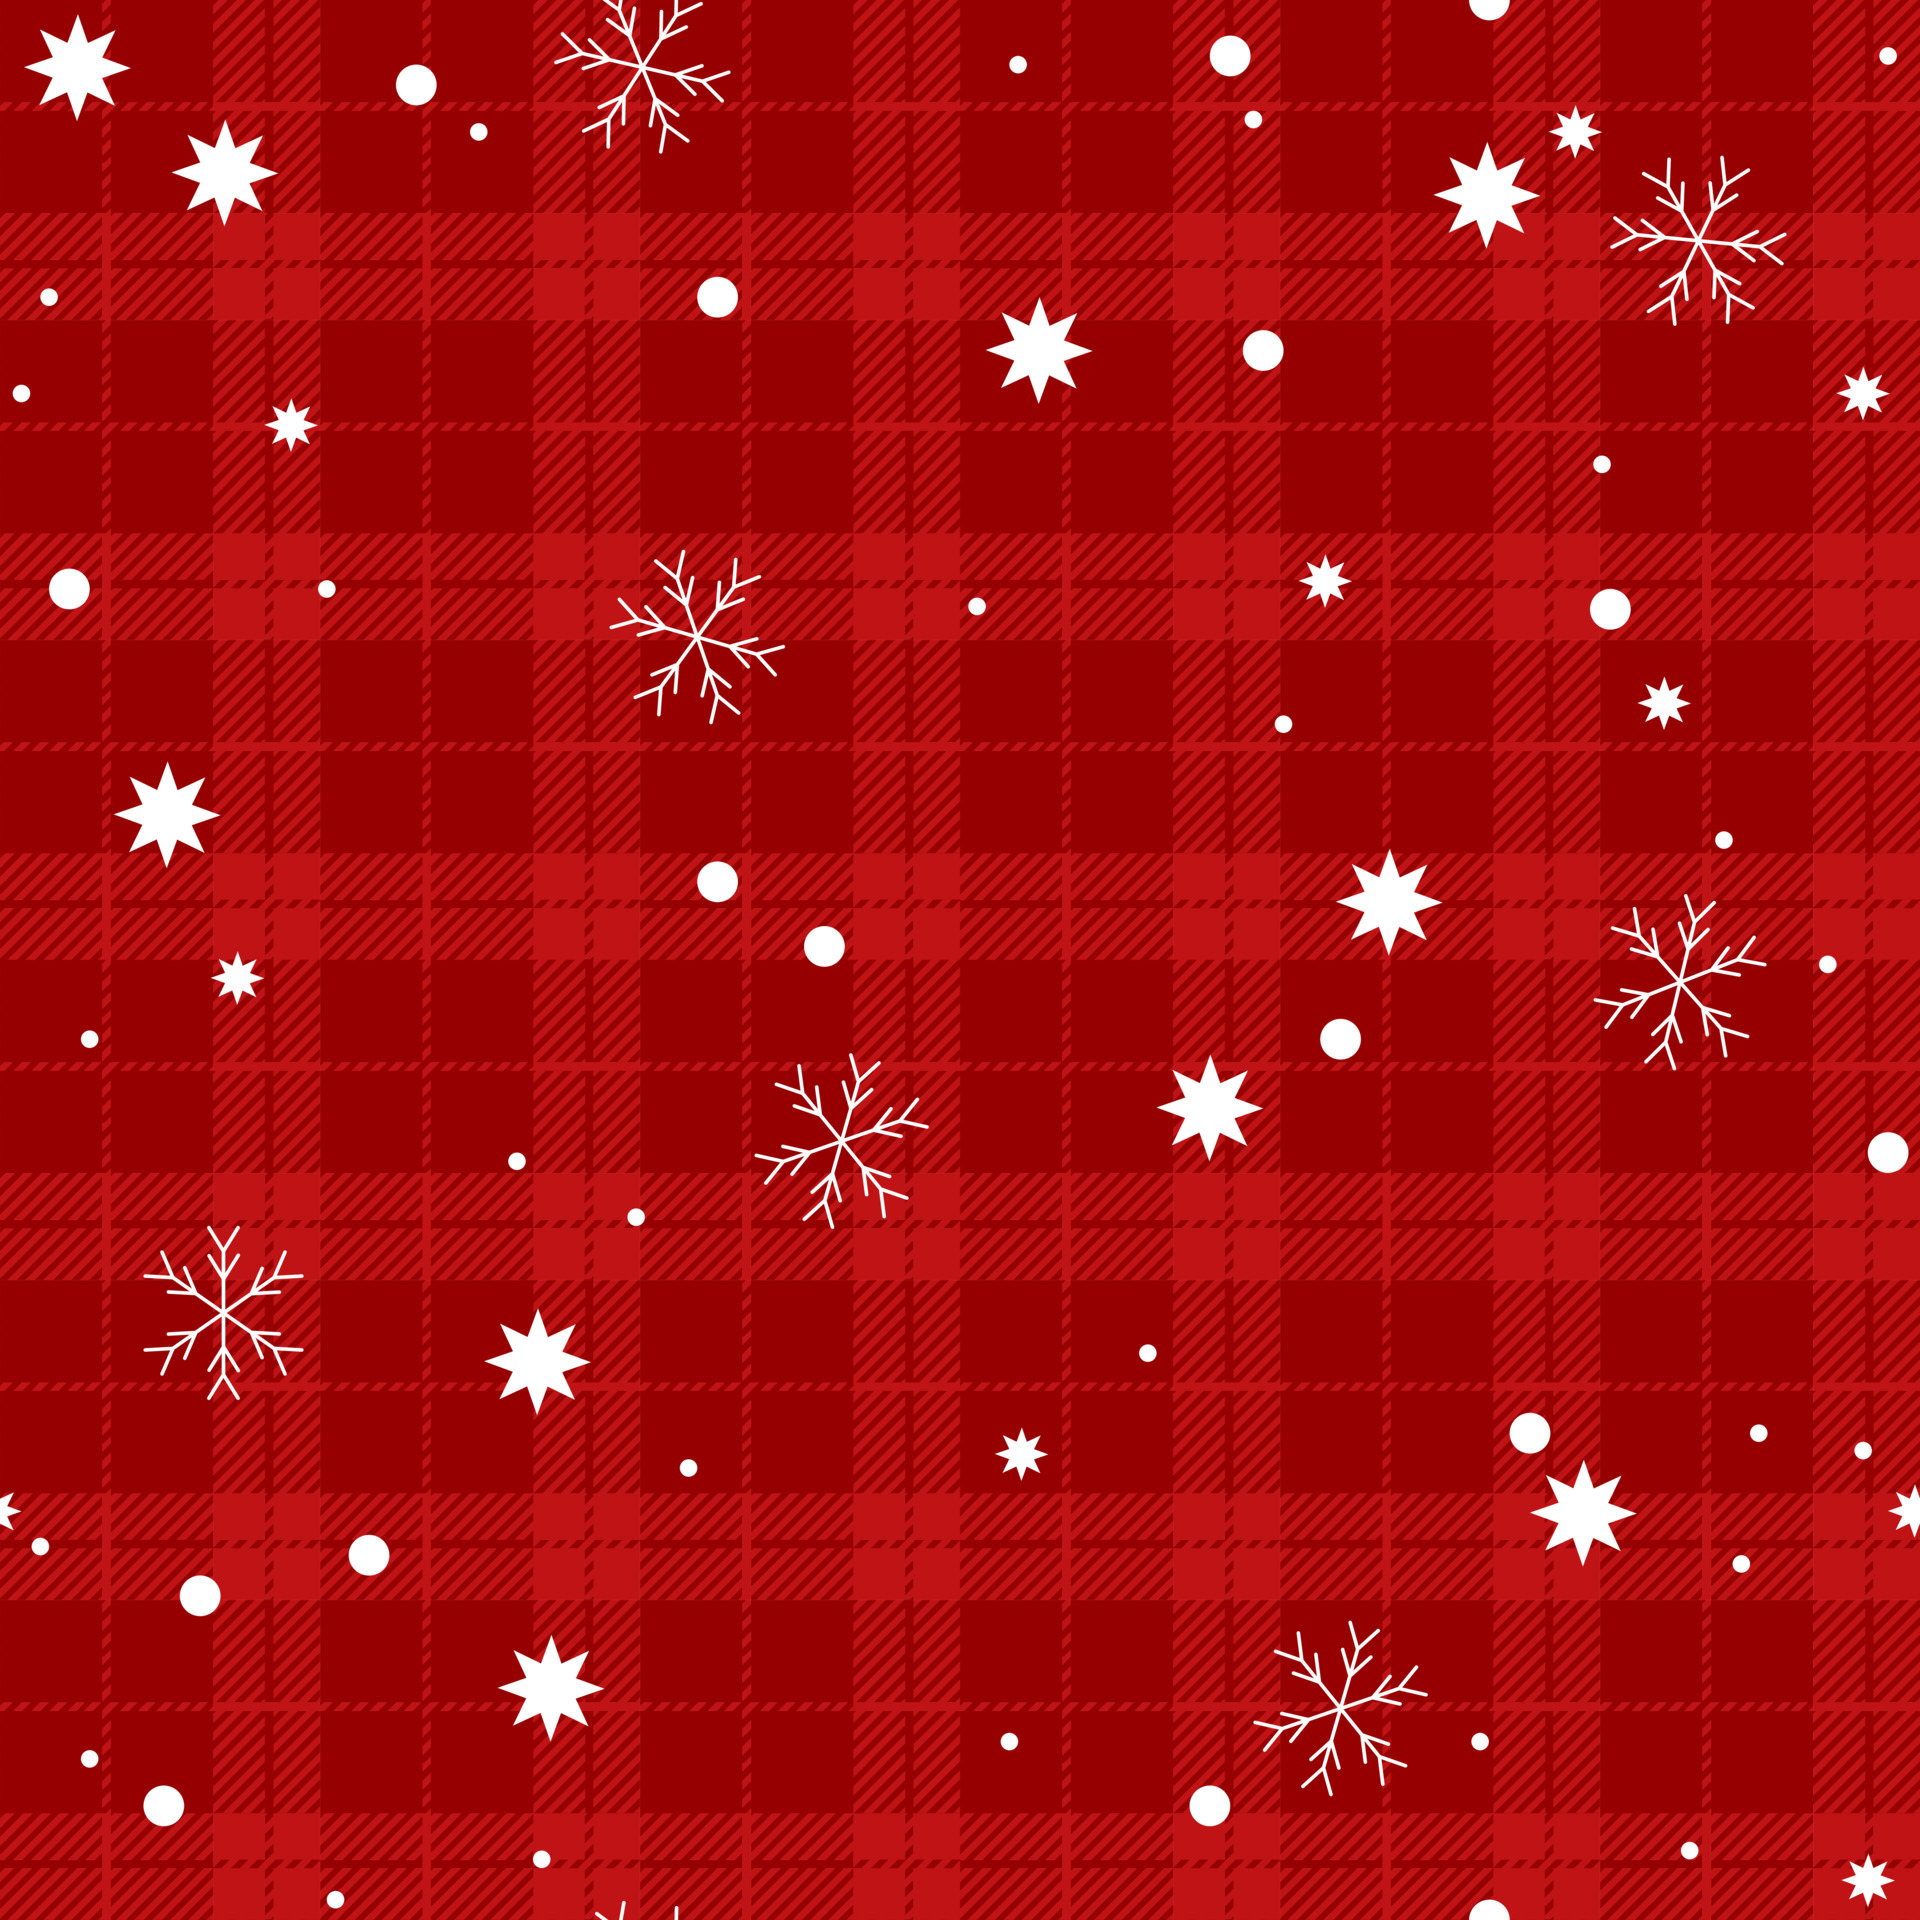 Christmas Red Tartan Plaid Vector Seamless Pattern background with winter snow, snowflakes and stars